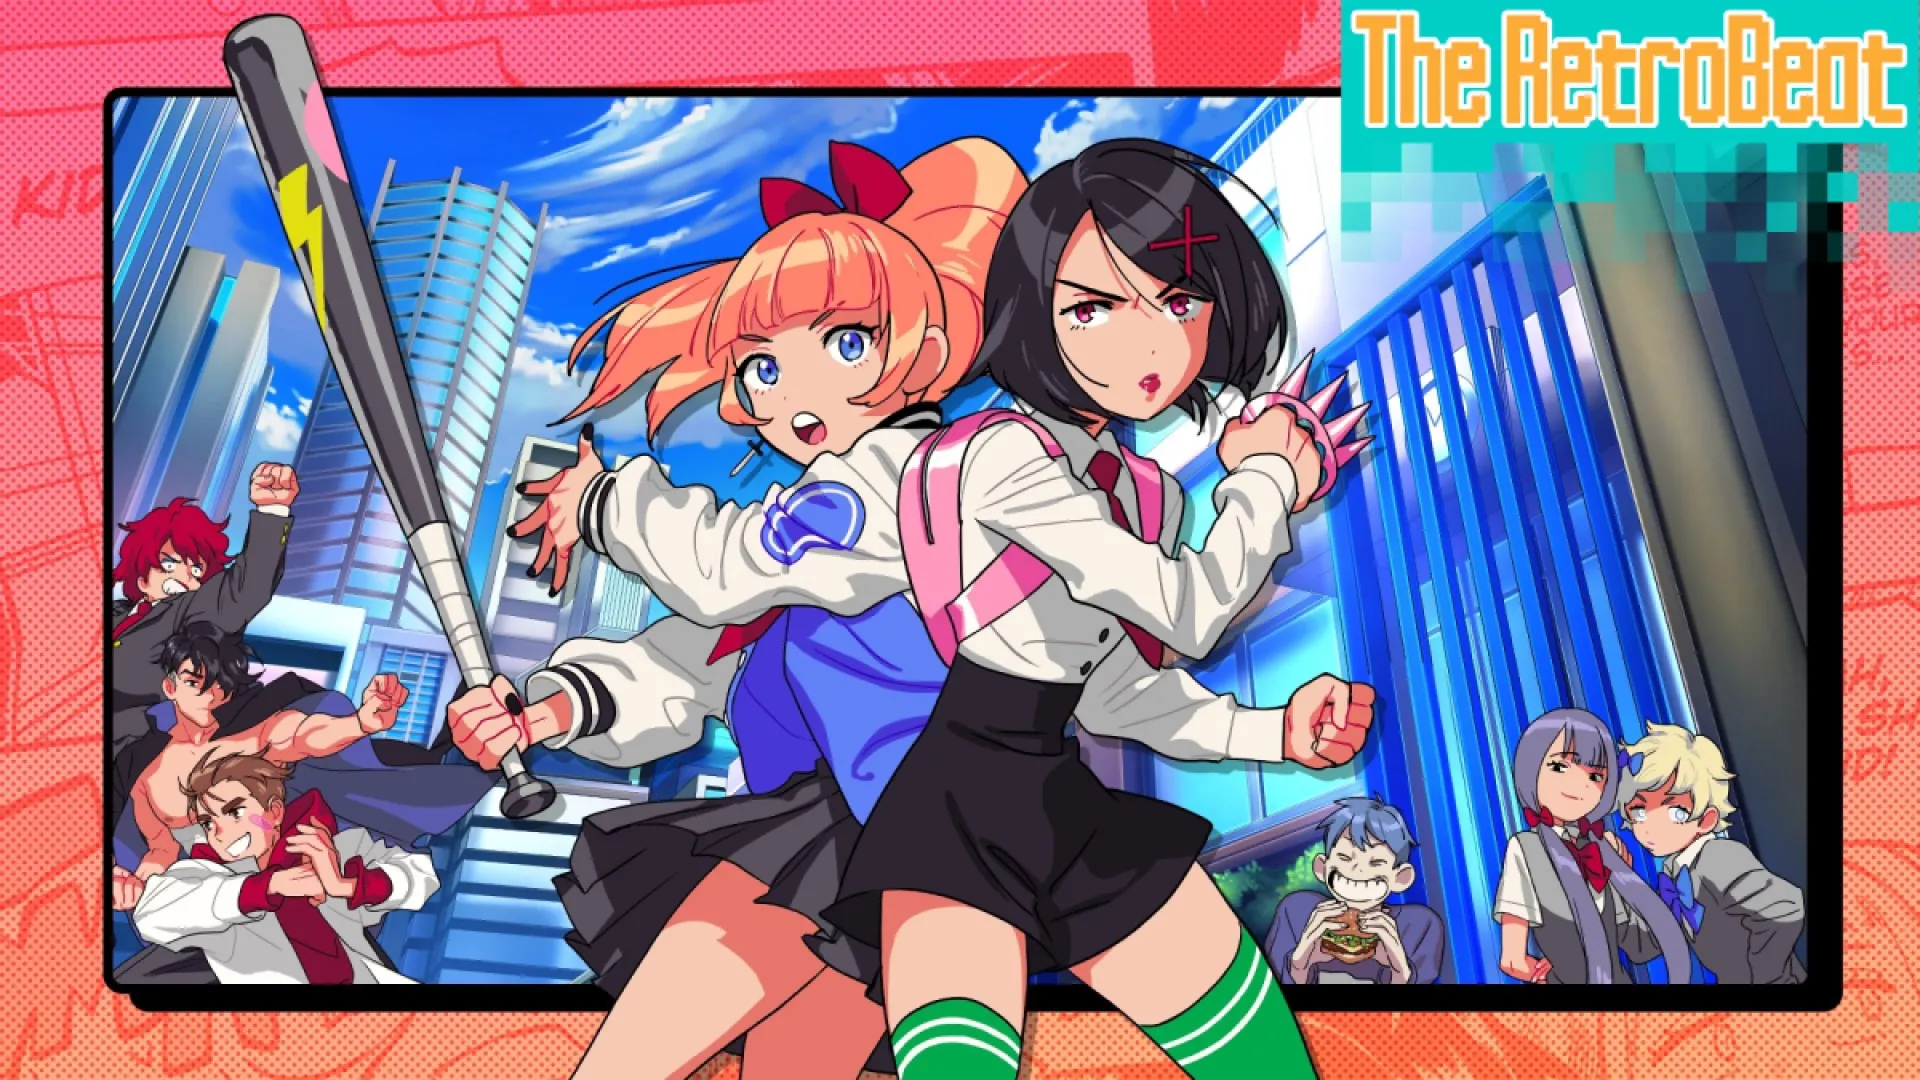 Two animated asian girls prepare and pose to fight in the game "River City Girls"